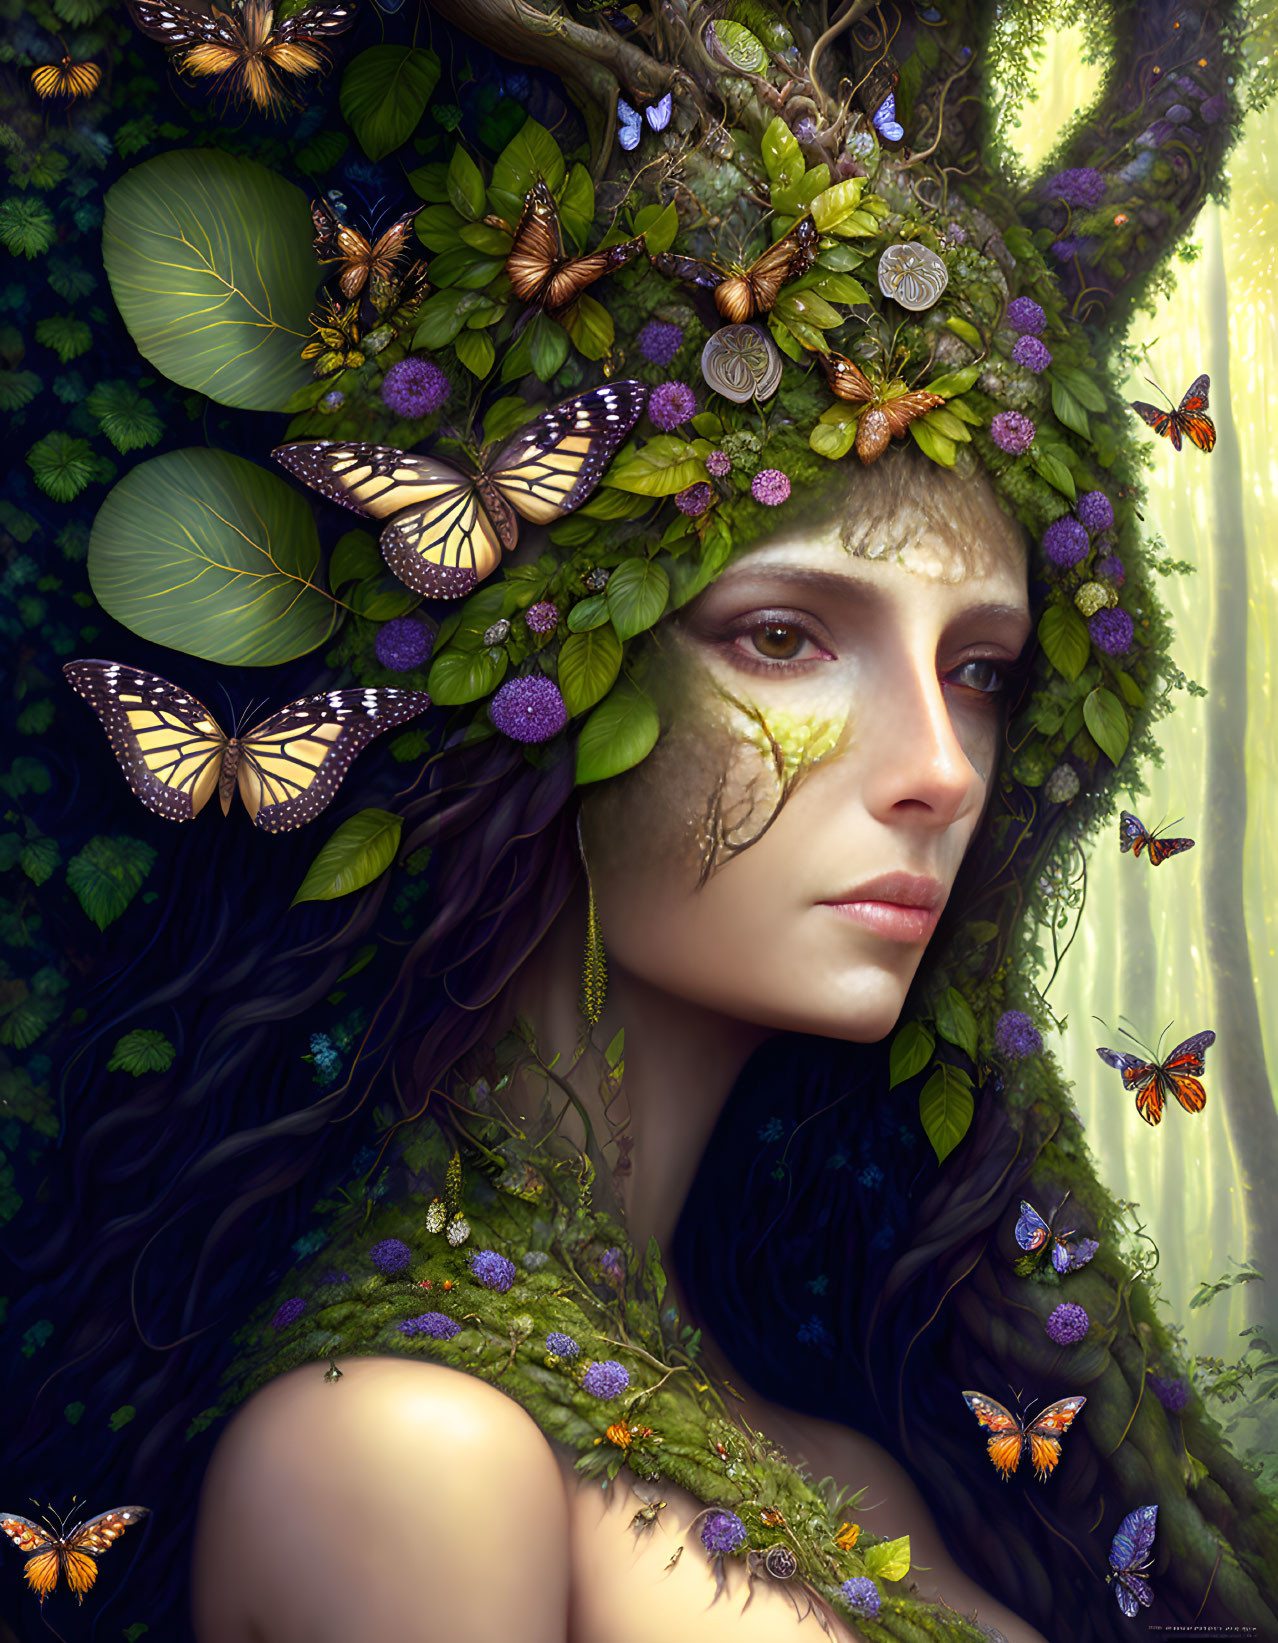 Fantasy portrait of woman with nature-inspired makeup and woodland adornments.